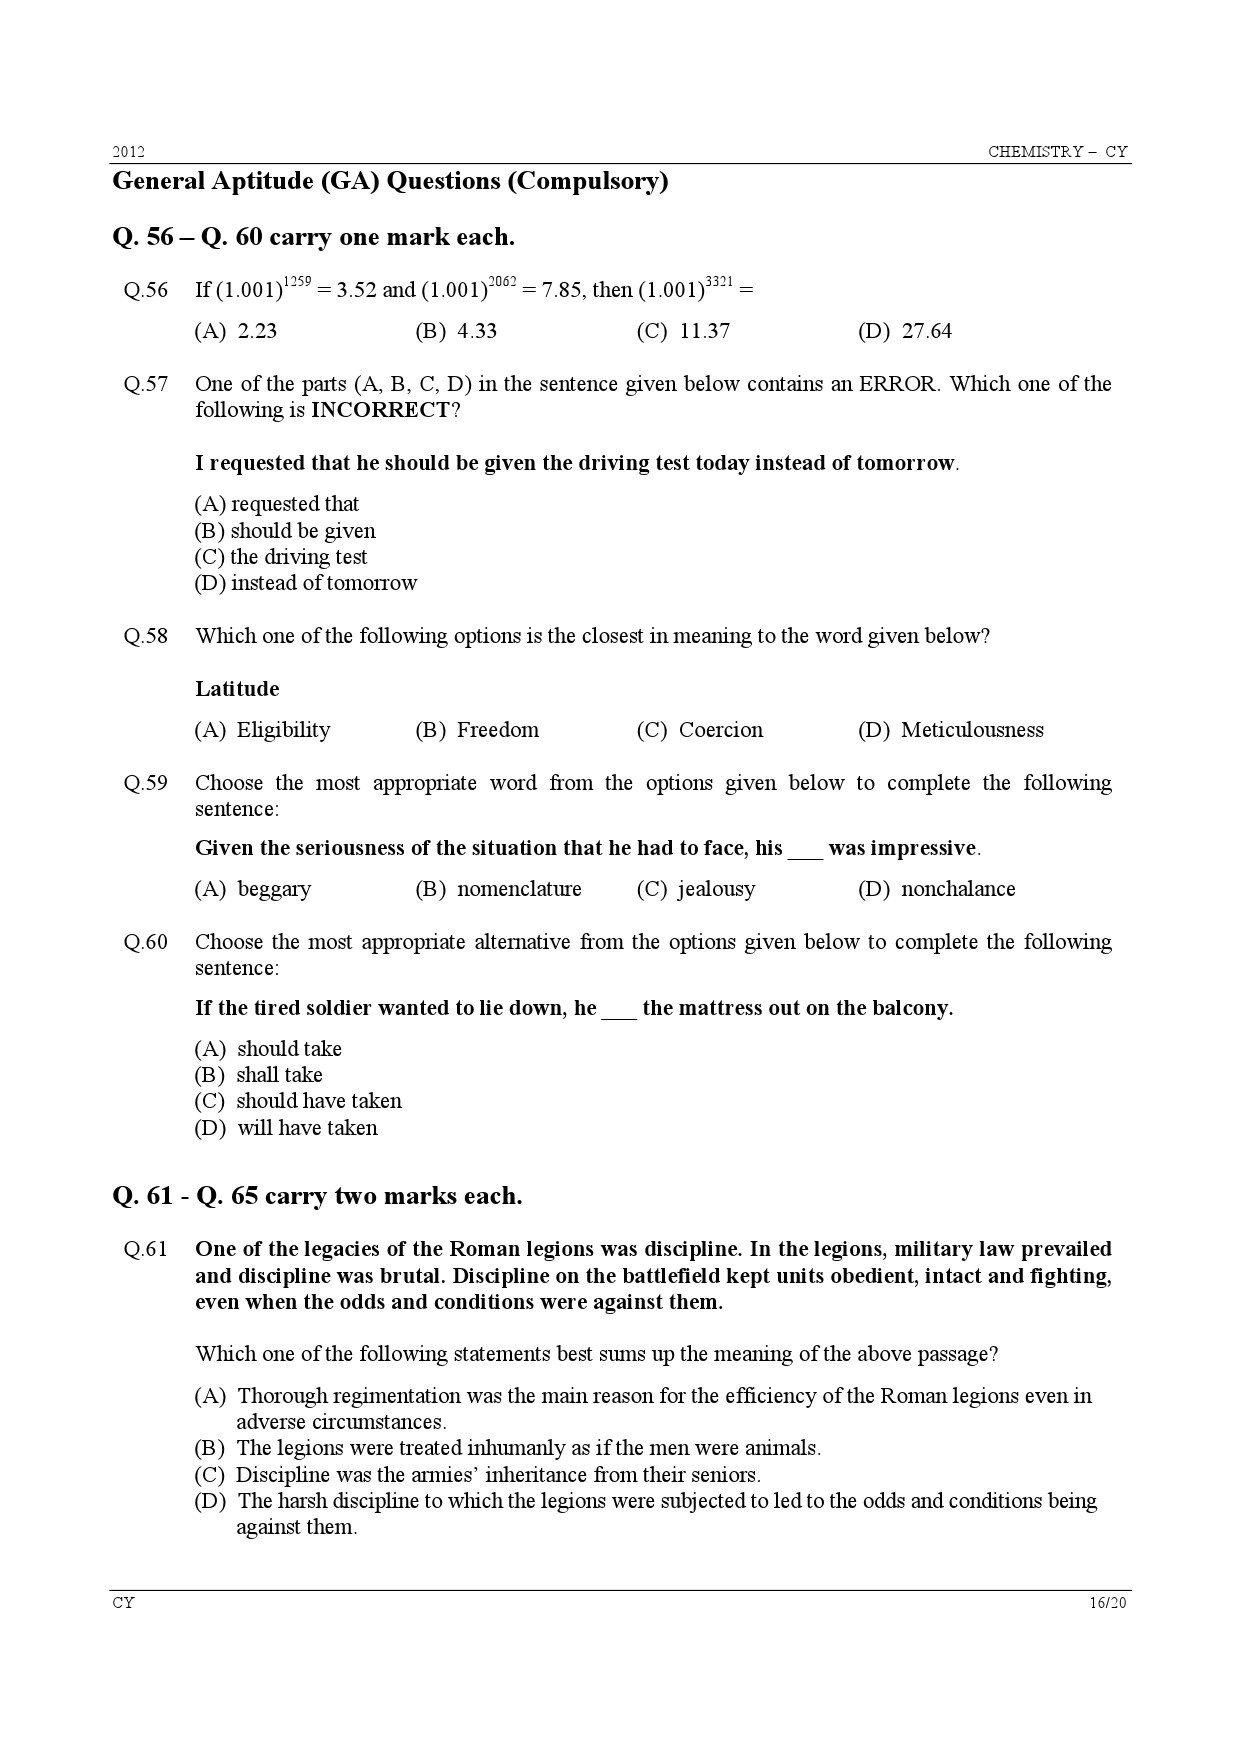 GATE Exam Question Paper 2012 Chemistry 16